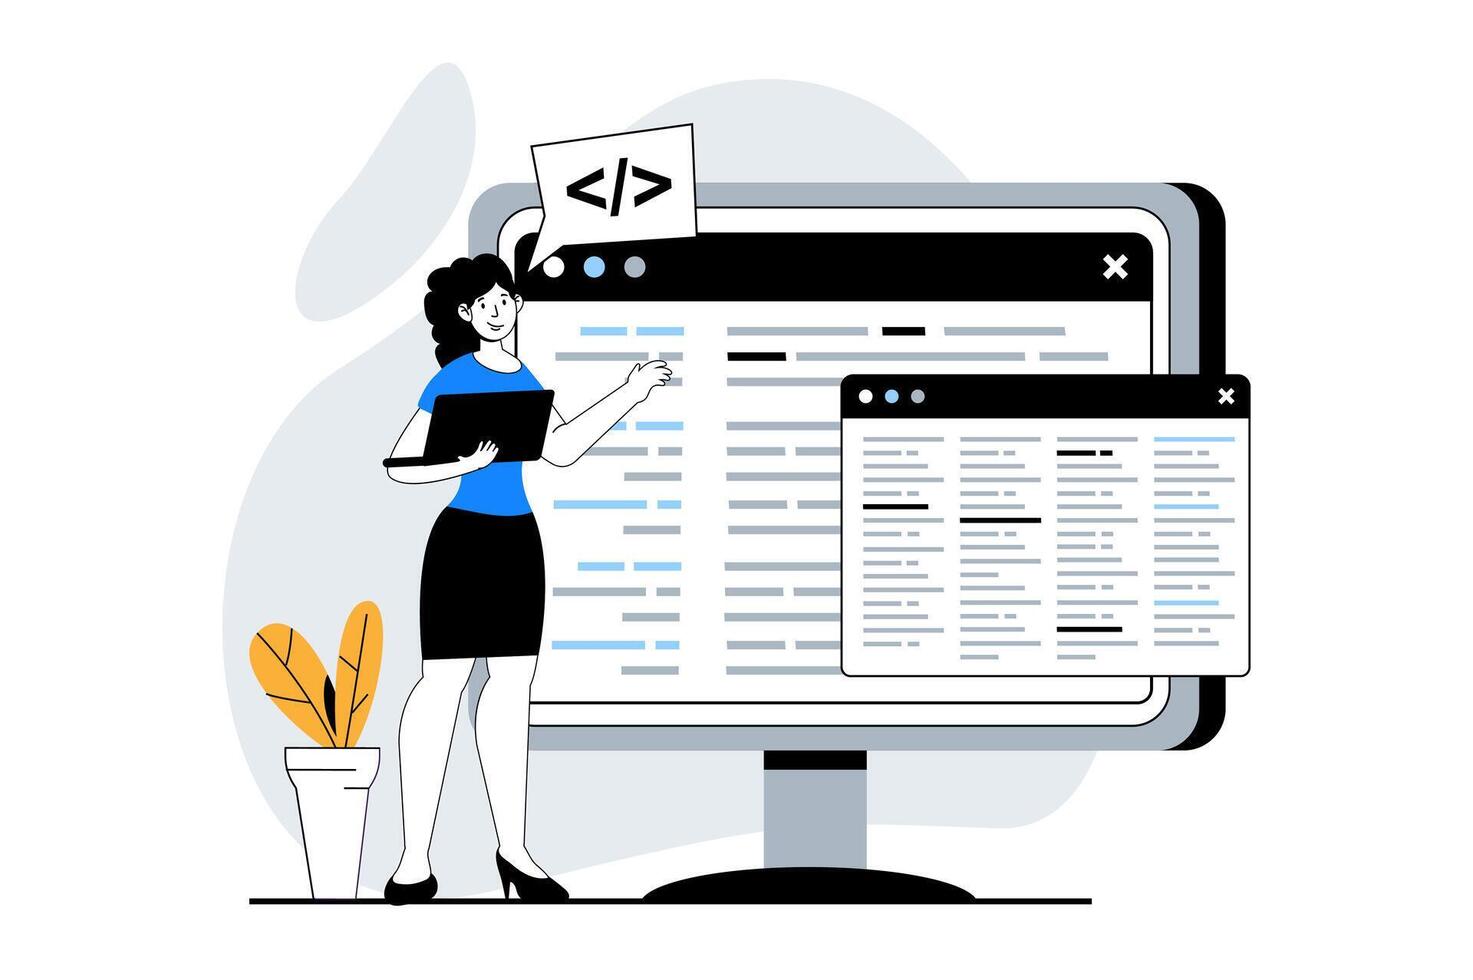 Web development concept with people scene in flat design. Woman working with programming code at computer screen and making layout. Vector illustration for social media banner, marketing material.